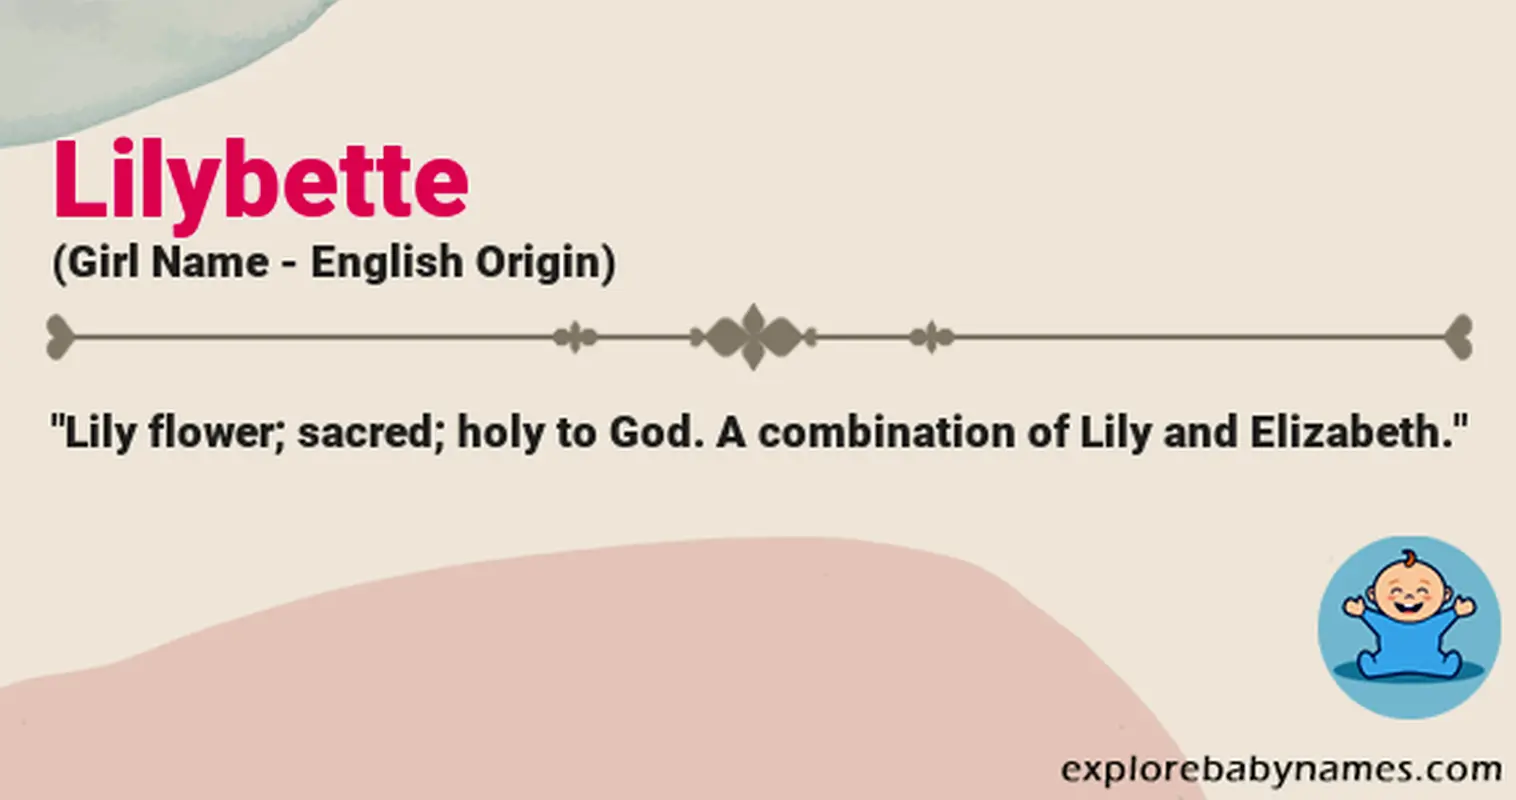 Meaning of Lilybette